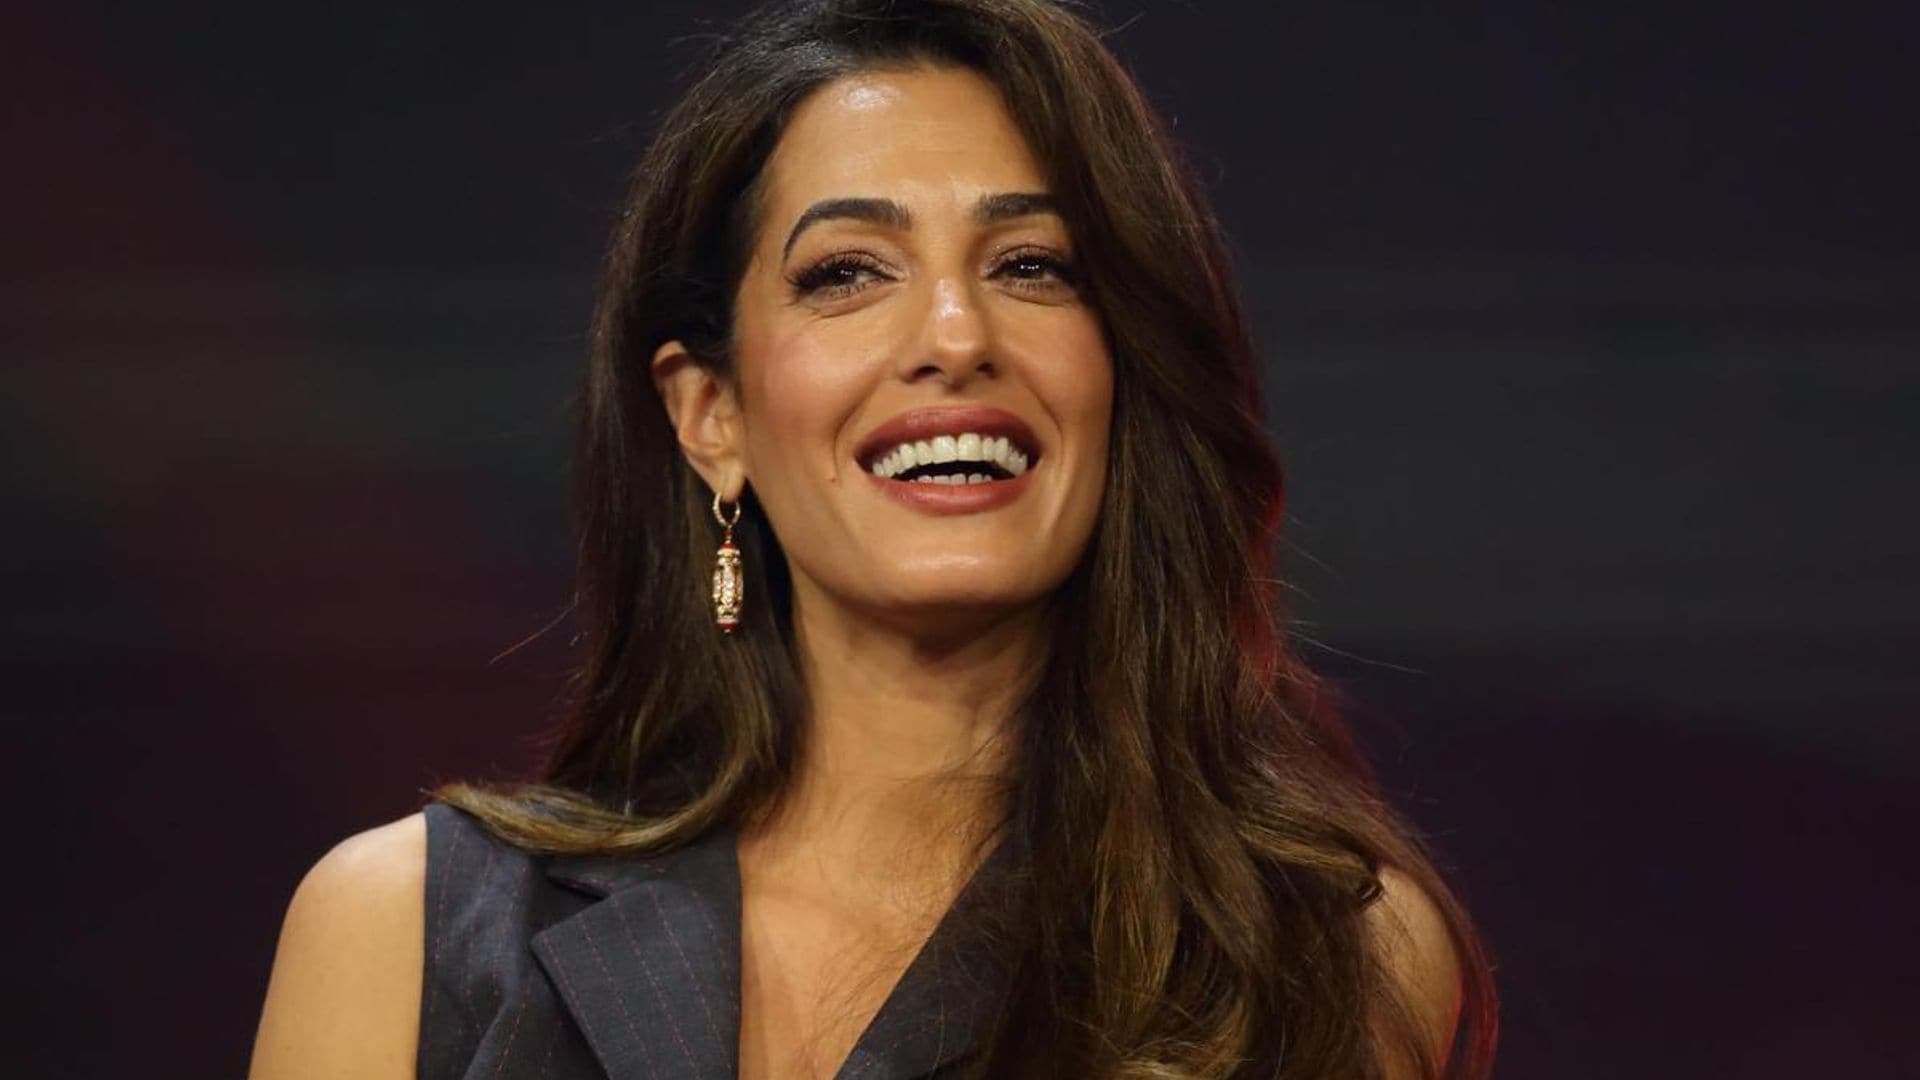 Amal Clooney mastered the disco look in dazzling mini dress during recent outing in Italy